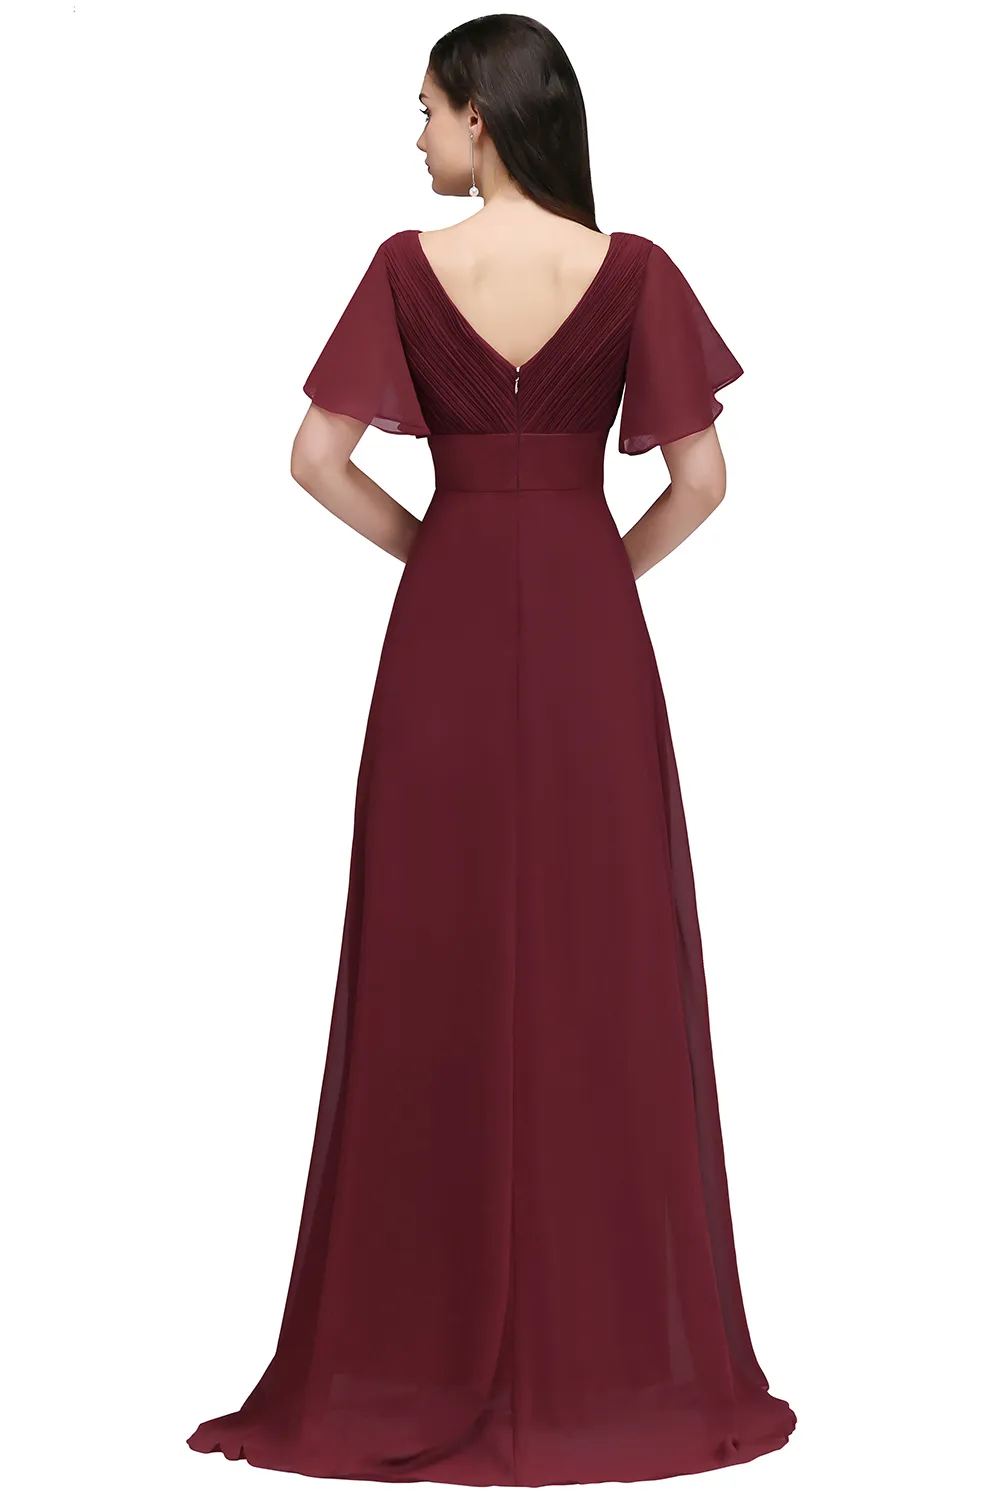 Wholesale Price Dark Red Long Chiffon Evening Dresses V Neck Low Back Flowy A Line Evening Party Gowns with Speaker Sleeves Cheap Online